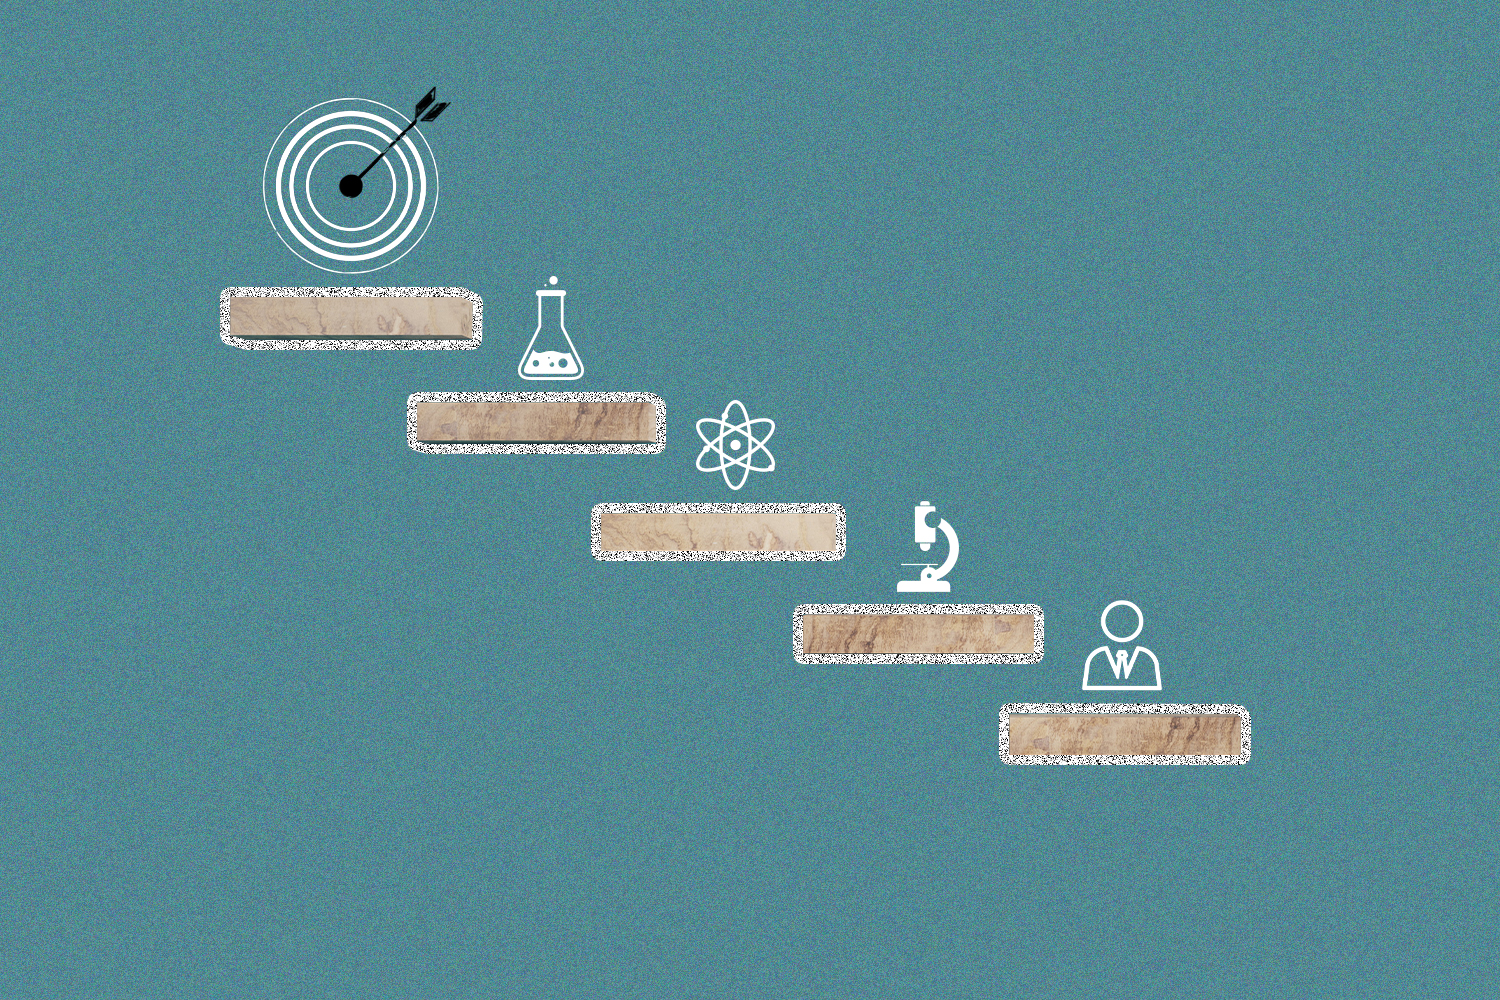 Five wooden steps leading upward, each with an icon above them, representing a person, a microscope, chemistry, a beaker, and a bullseye, all on a teal background